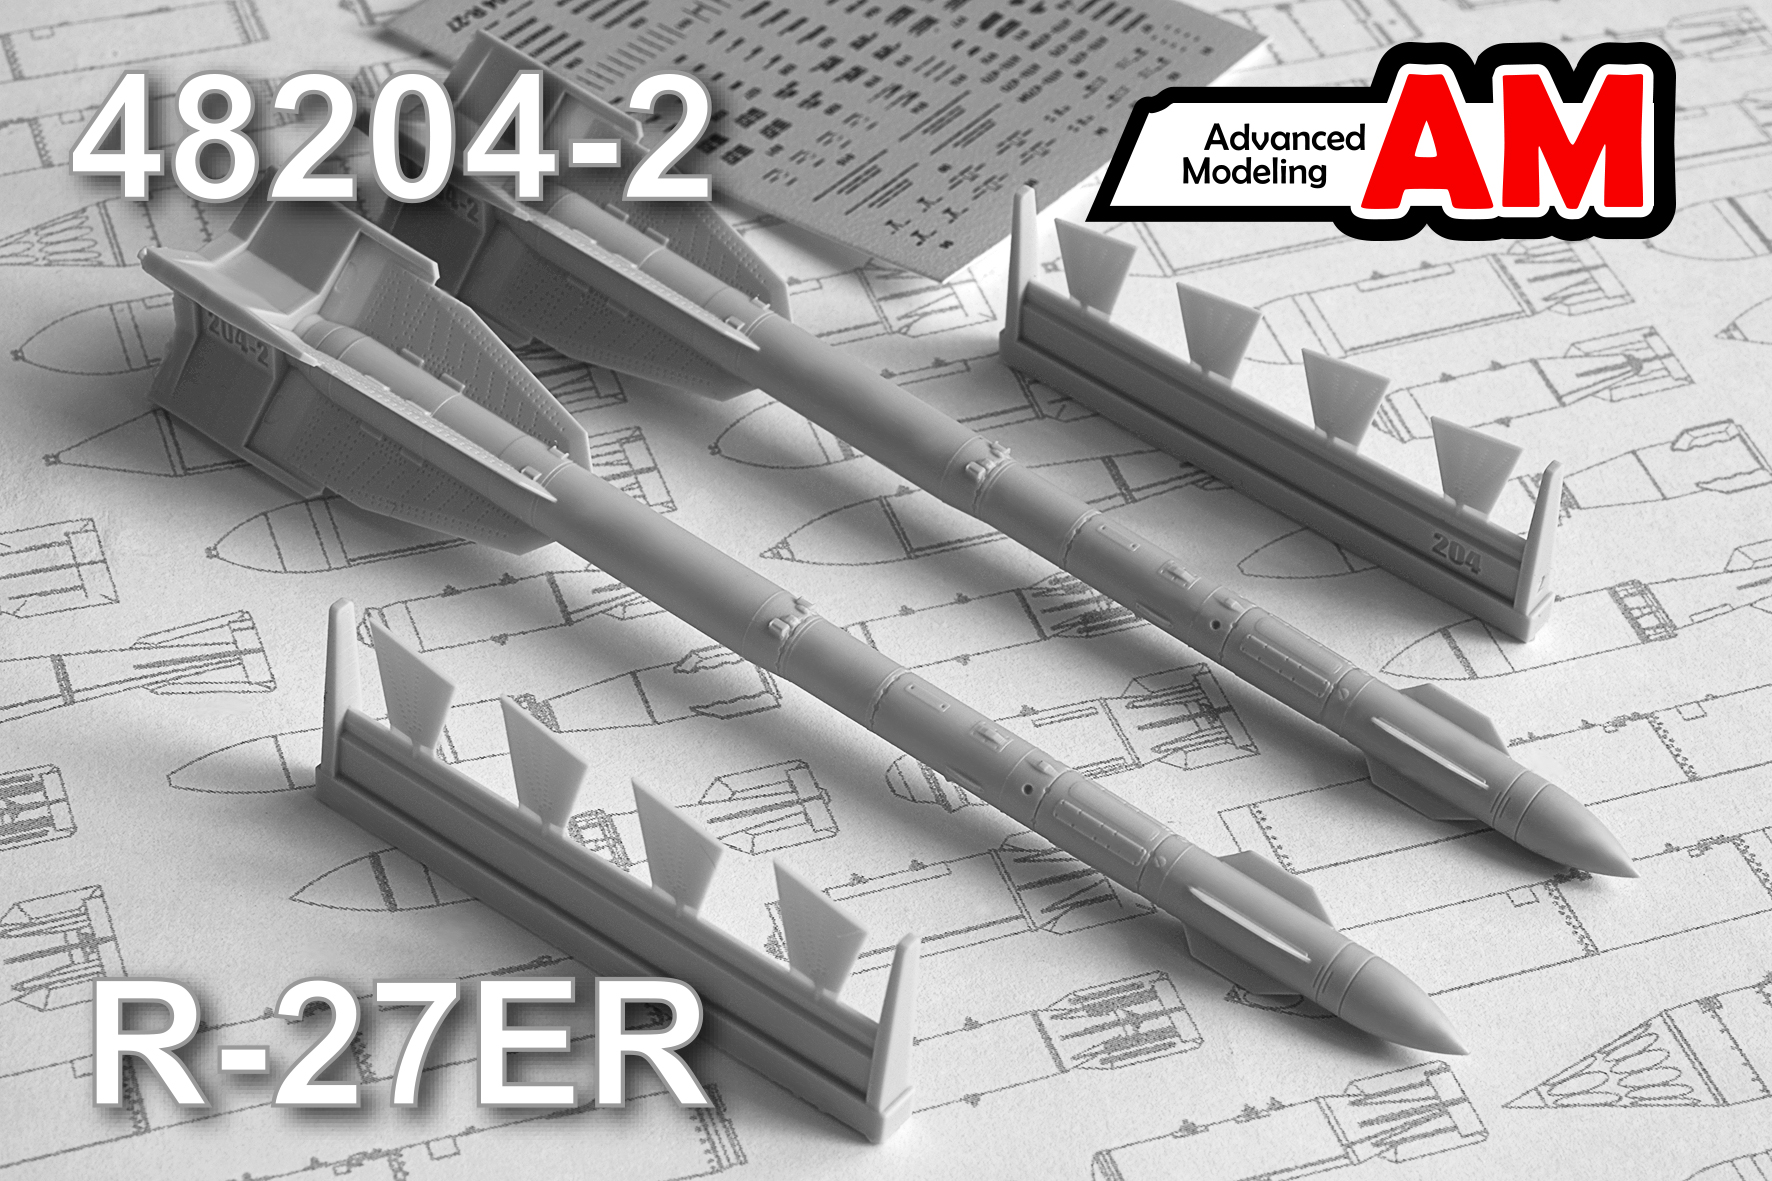 Additions (3D resin printing) 1/48 R-27ER Air to Air missile (Advanced Modeling) 